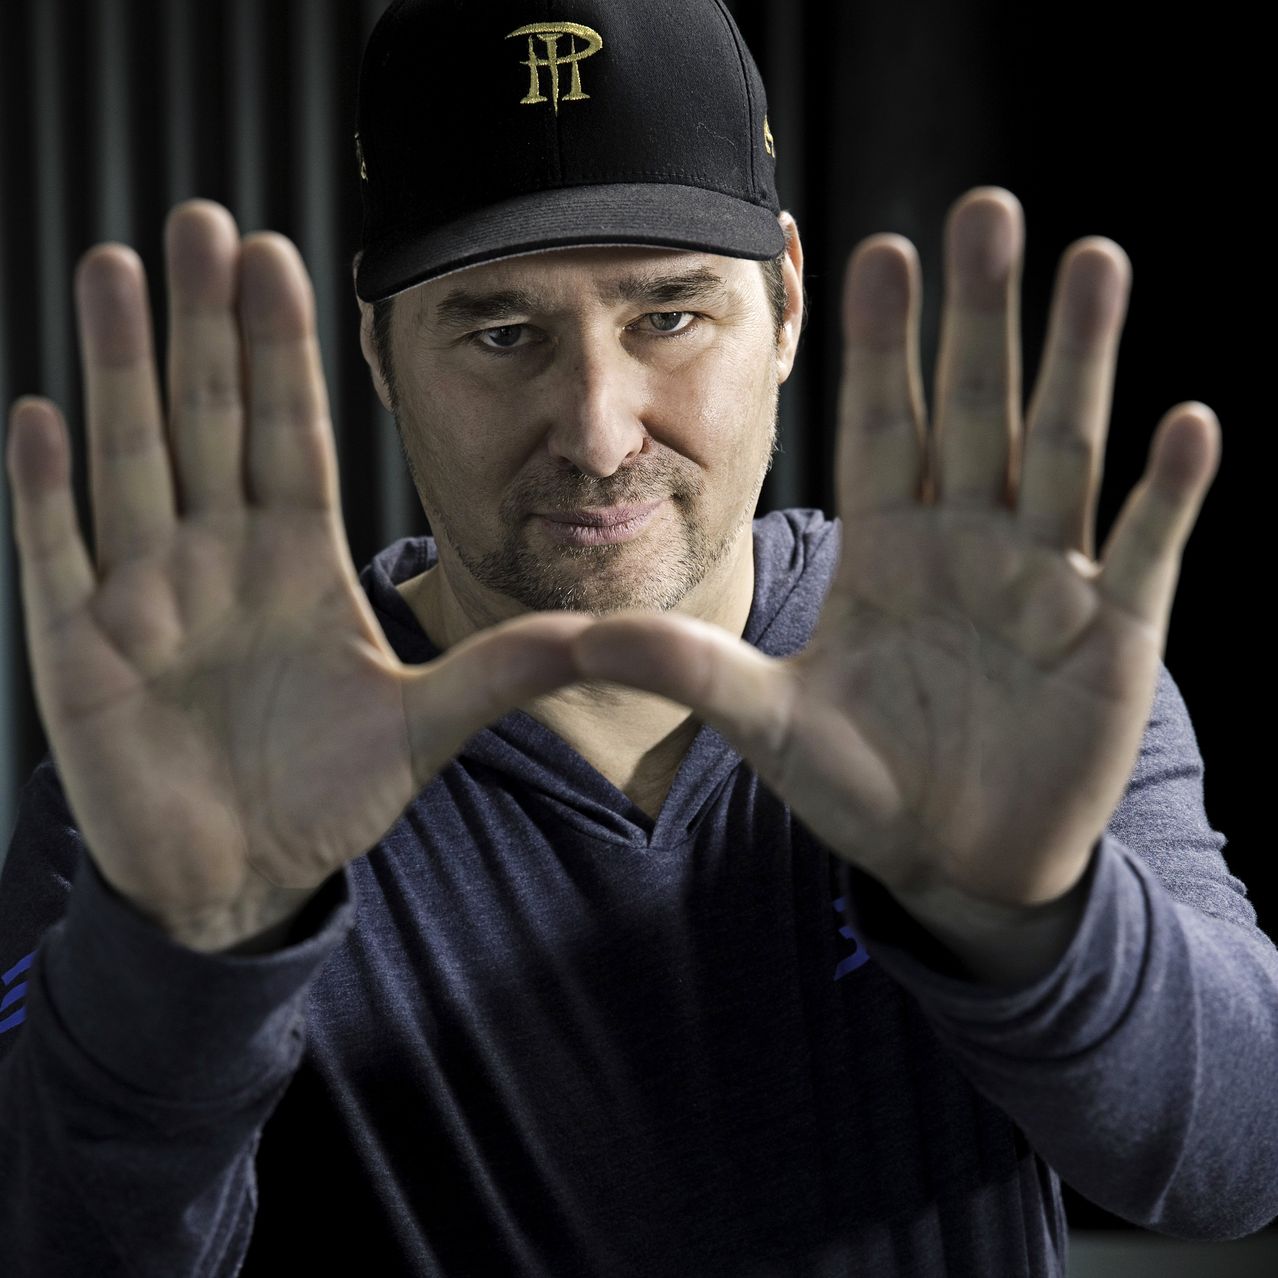 Prop Bet Report: Phil Hellmuth Sinks Three-Pointer to Win $10K from Doug Polk